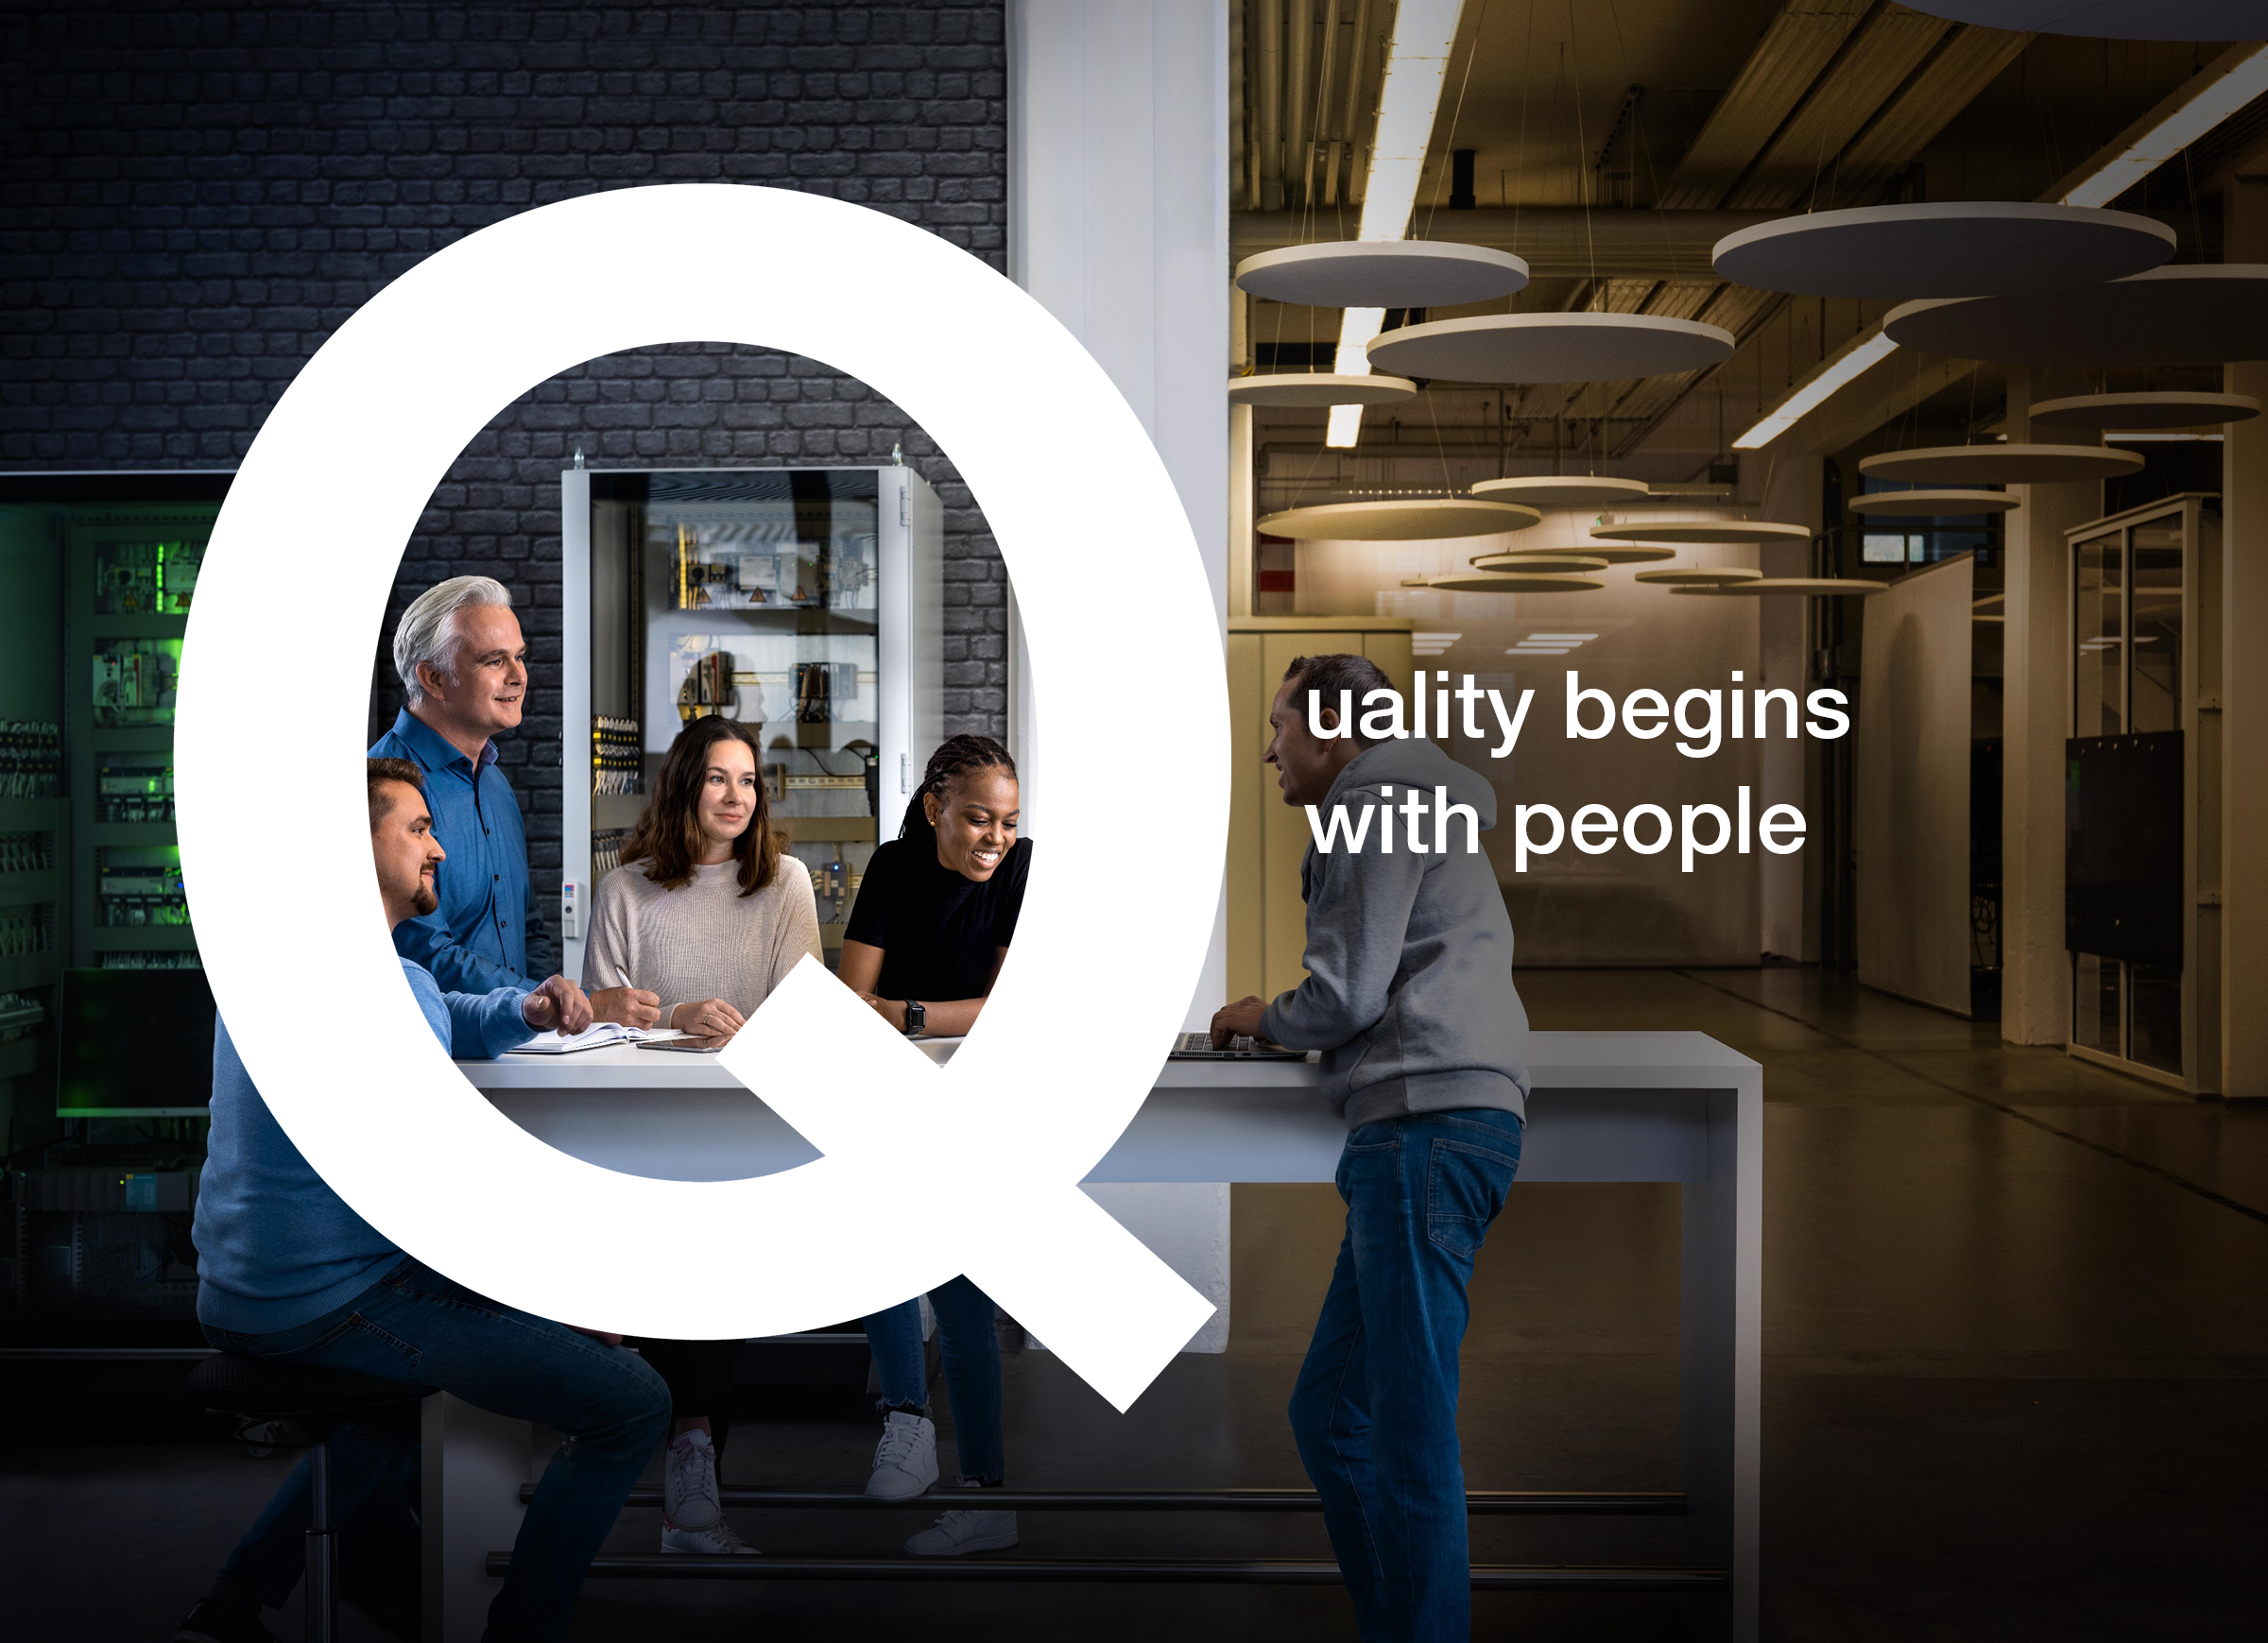 Quality begins with people